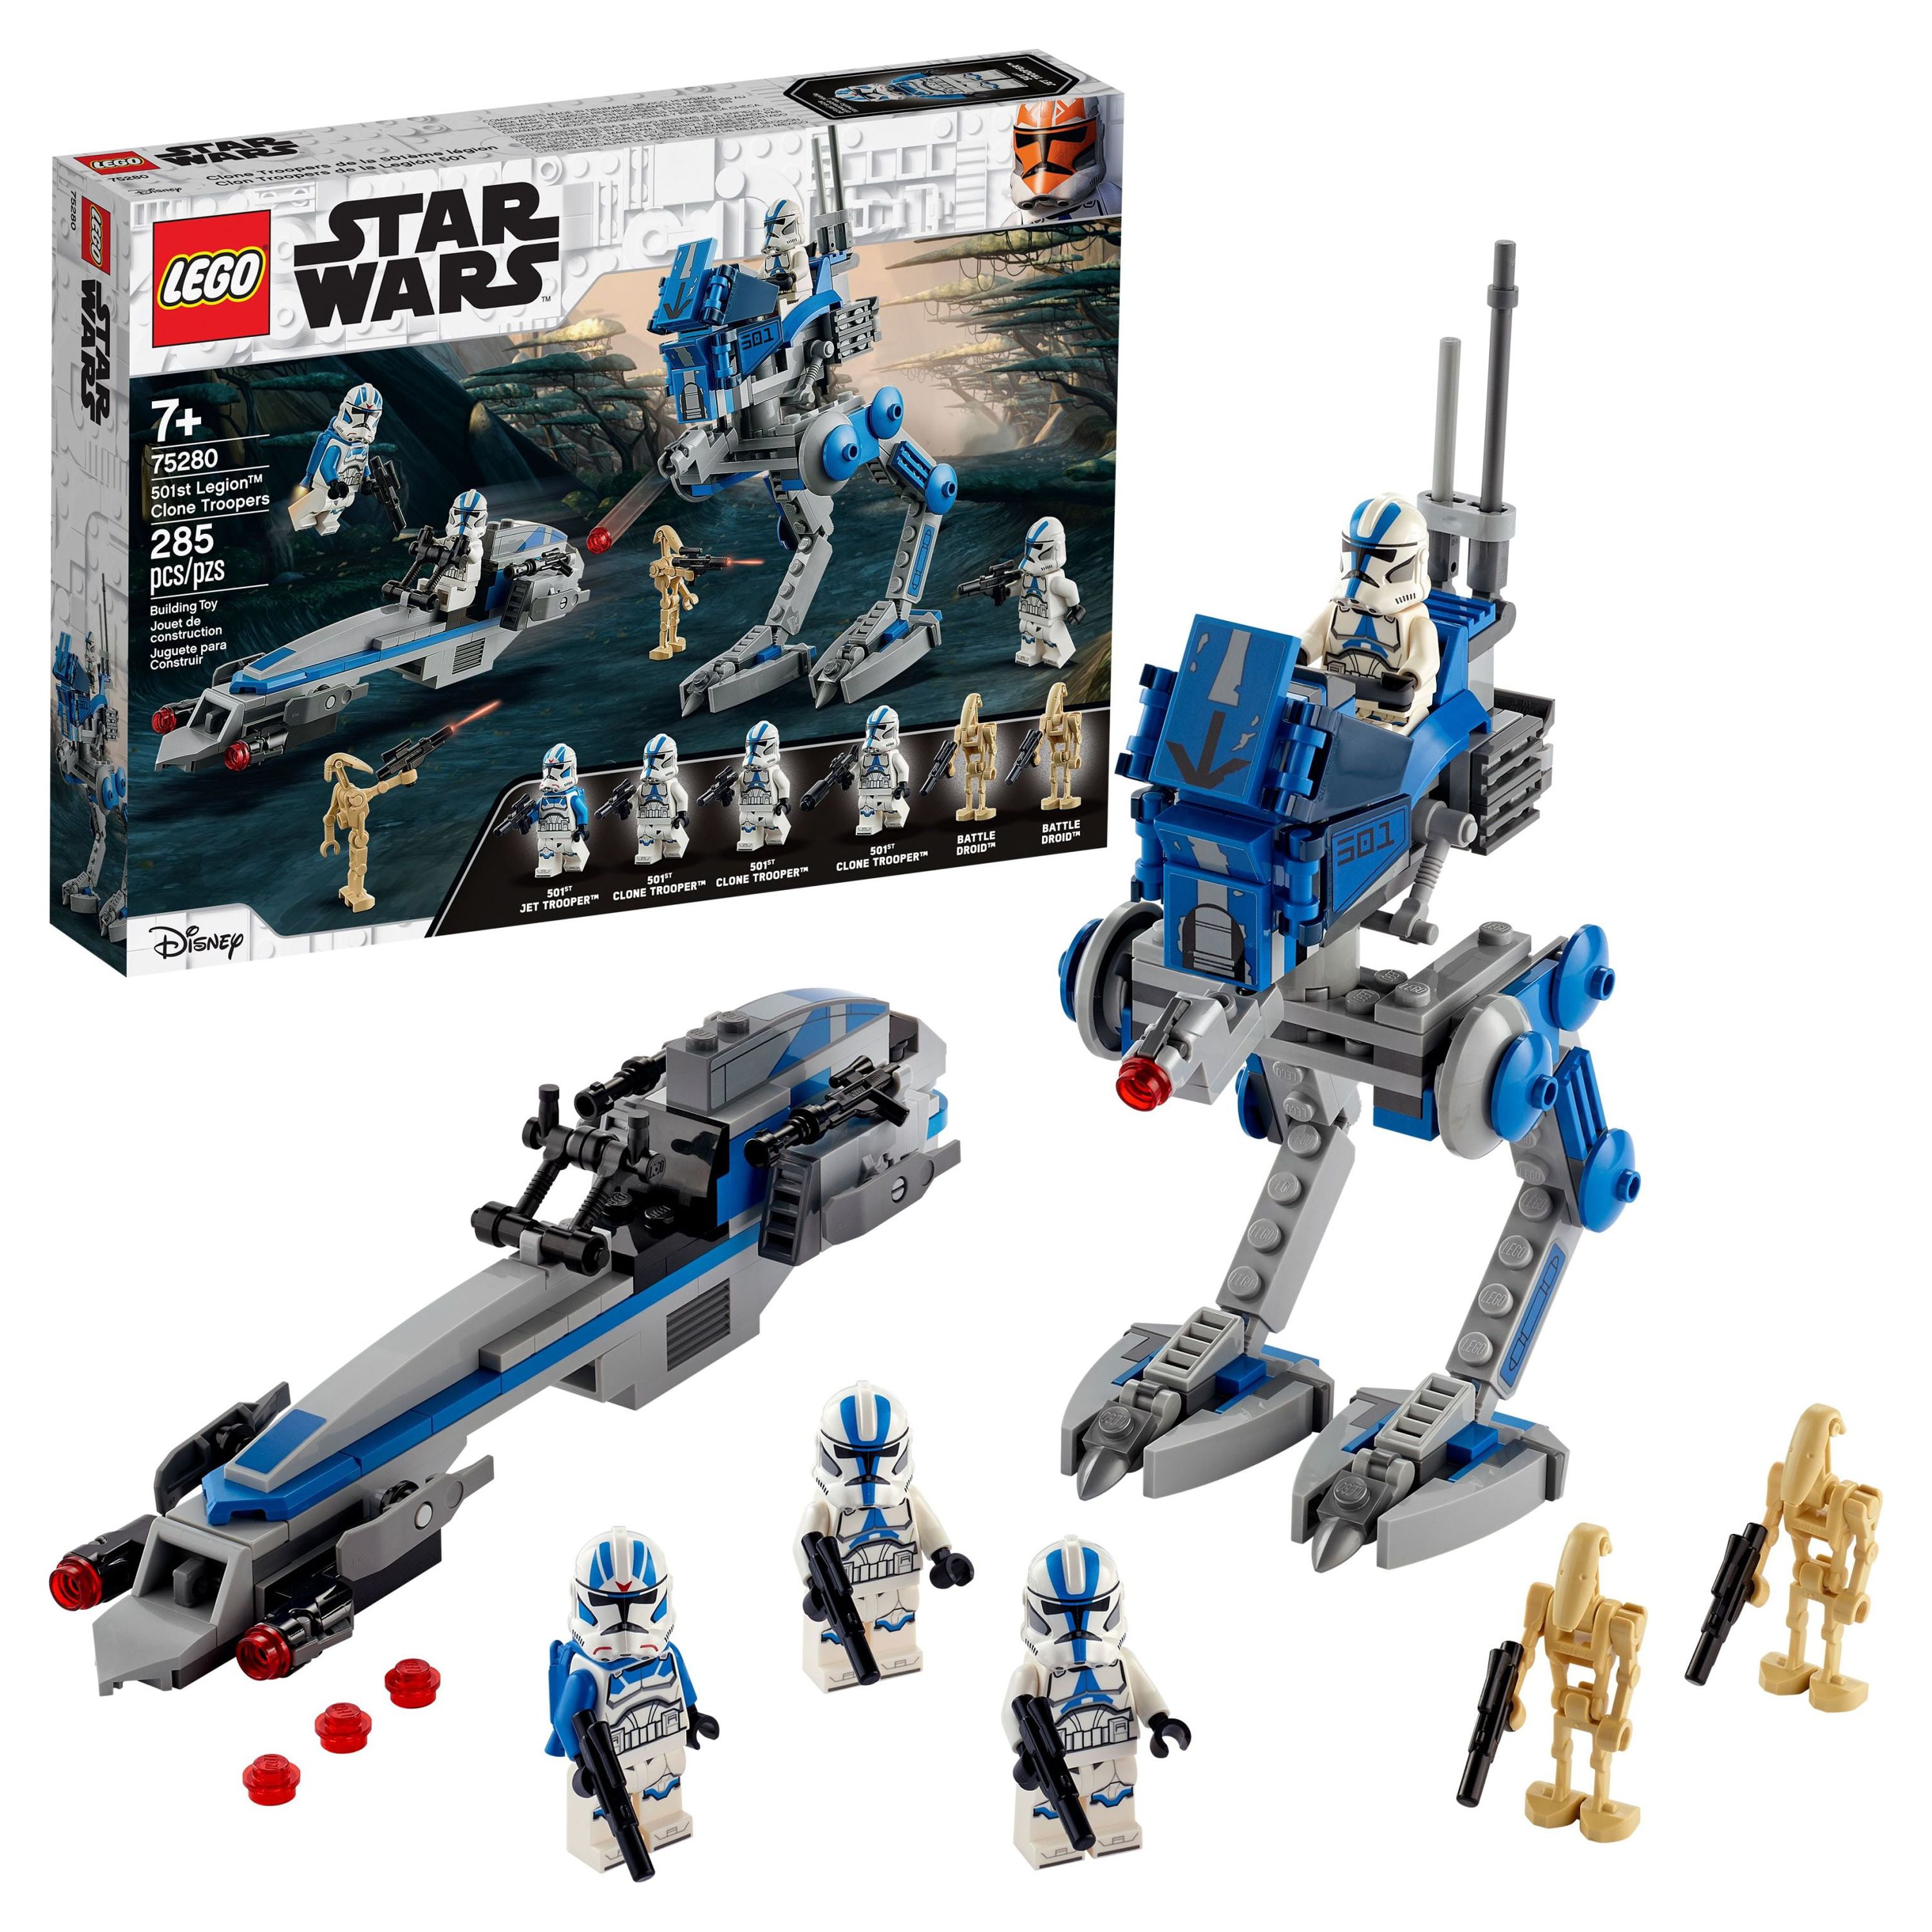 LEGO Star Wars 501st Legion Clone Troopers 75280 Building Toy, Cool Action Set for Creative Play (285 Pieces) - image 1 of 7